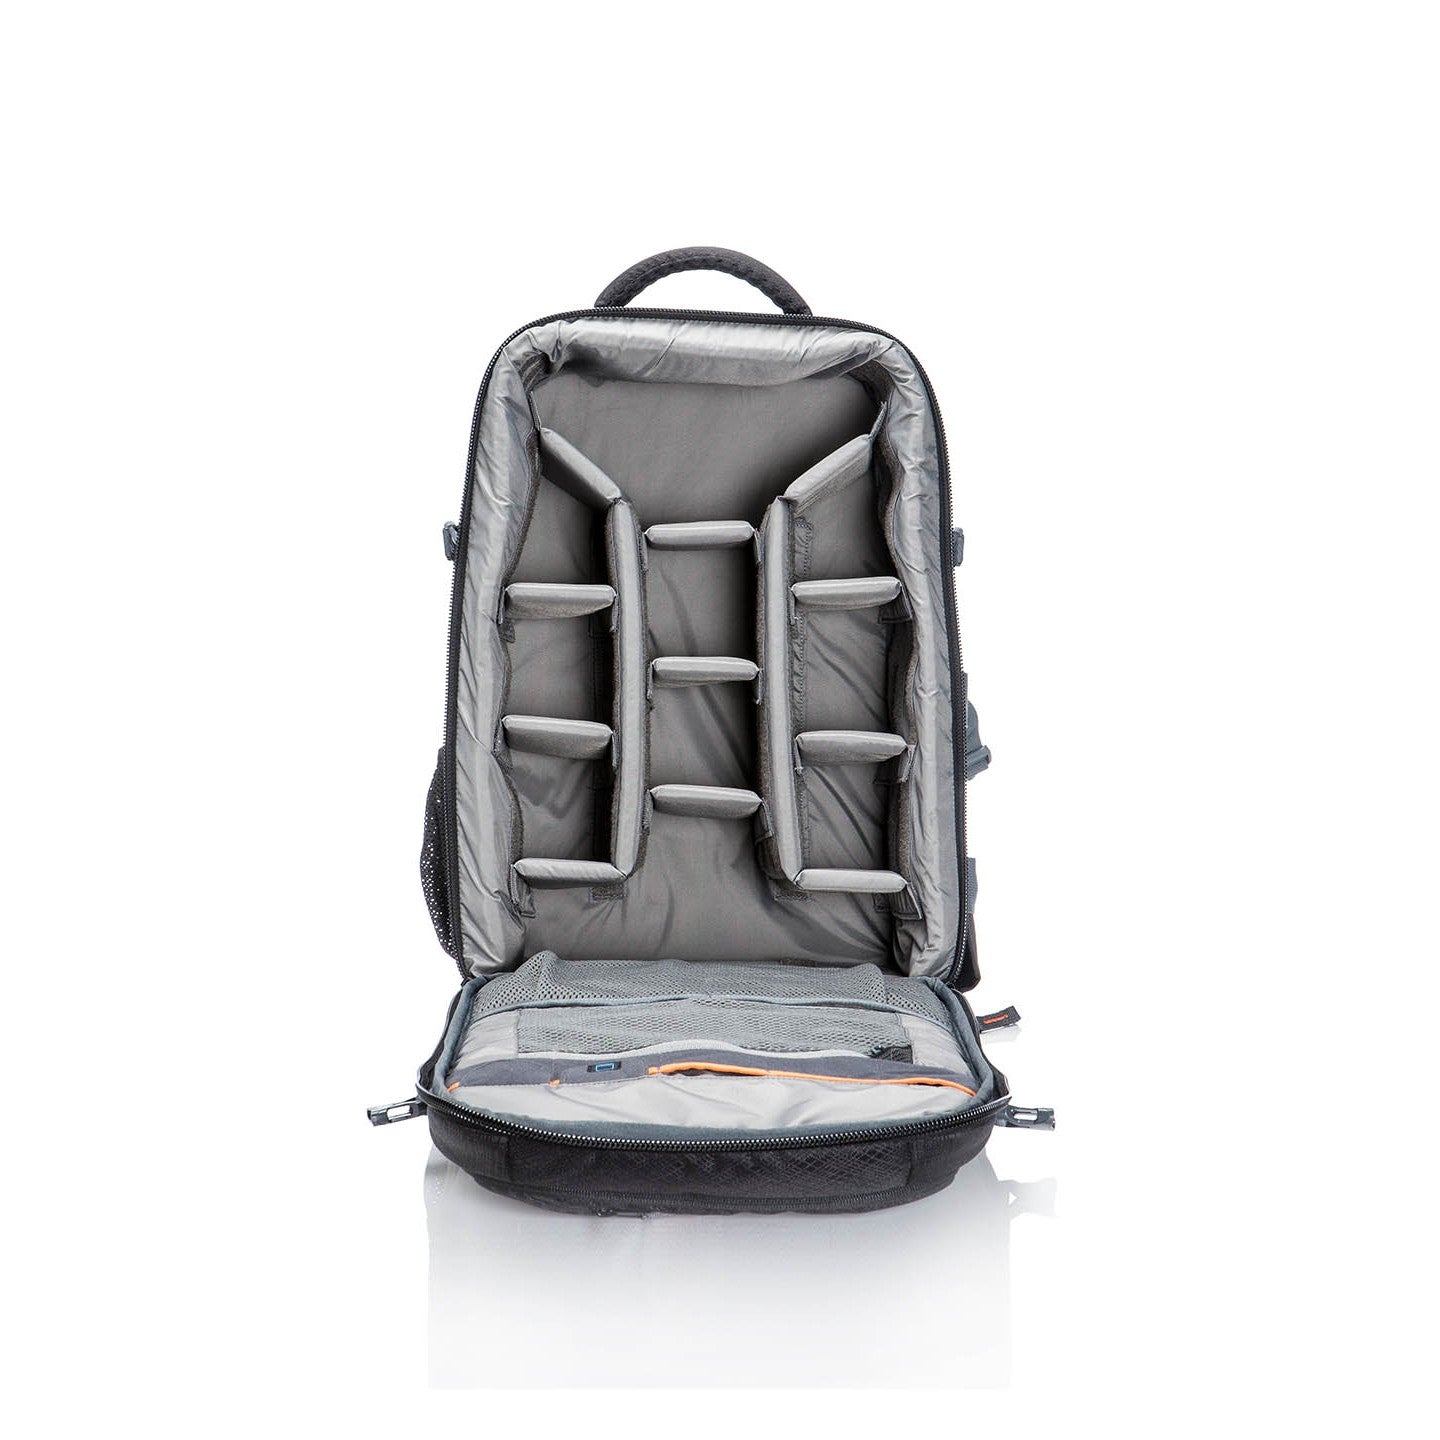 Image: Front view of the P41 Tribute DSLR camera bag, showcasing its empty compartments and customizable dividers. The bag's spacious interior offers versatile storage options for your camera and accessories. Stay organized and ready for your photography adventures with the P41 Tribute.